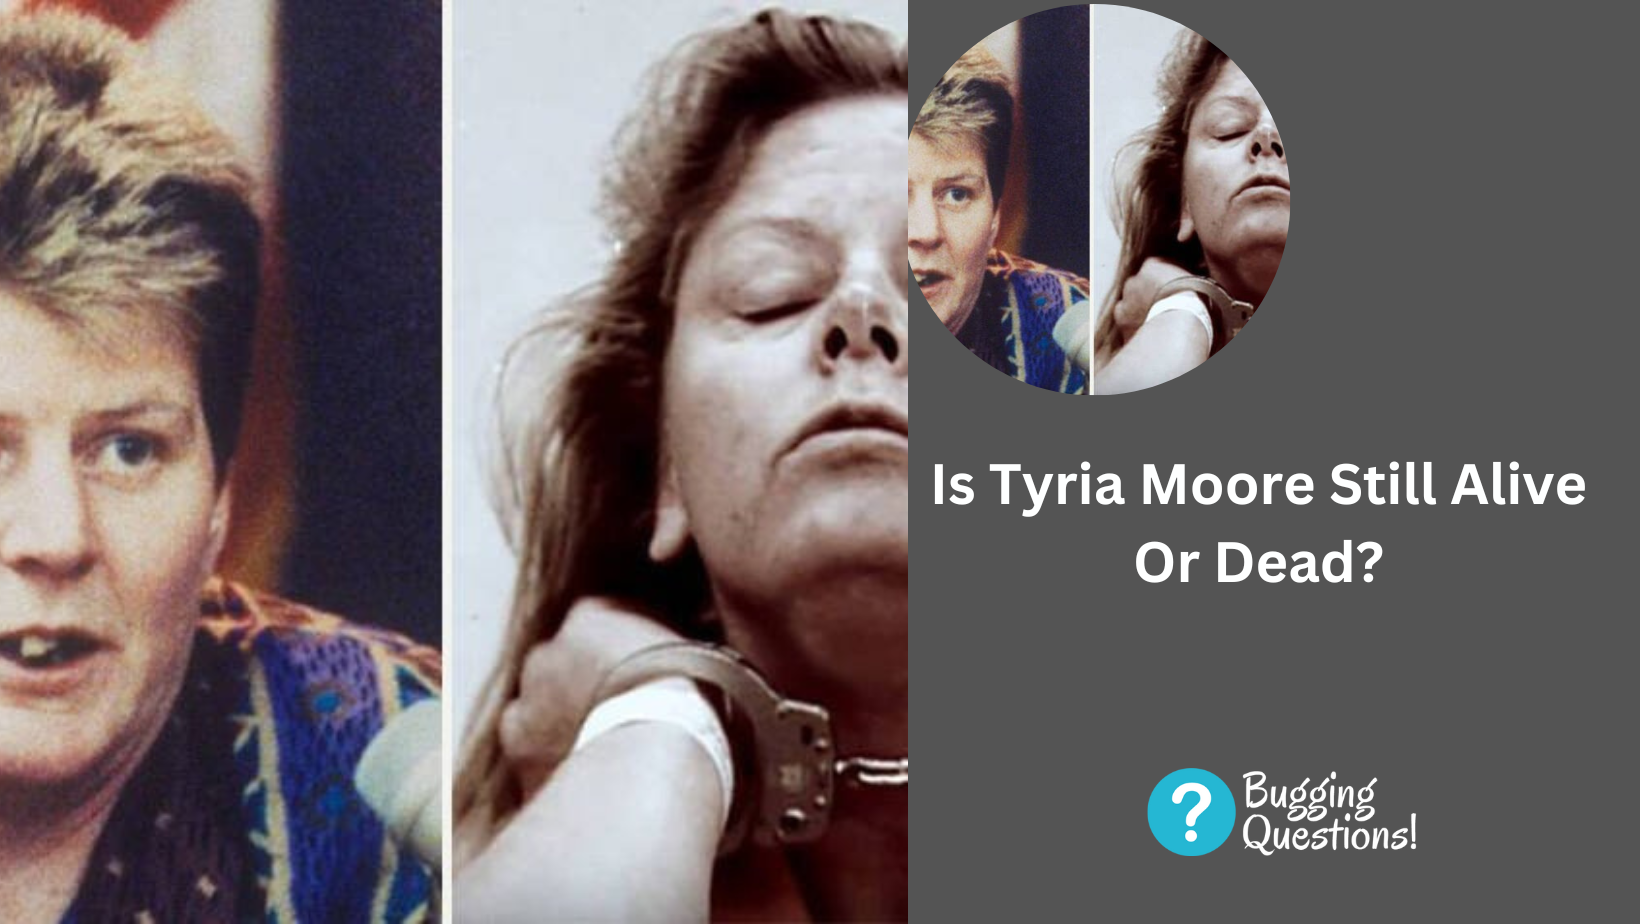 Is Tyria Moore Still Alive Or Dead?